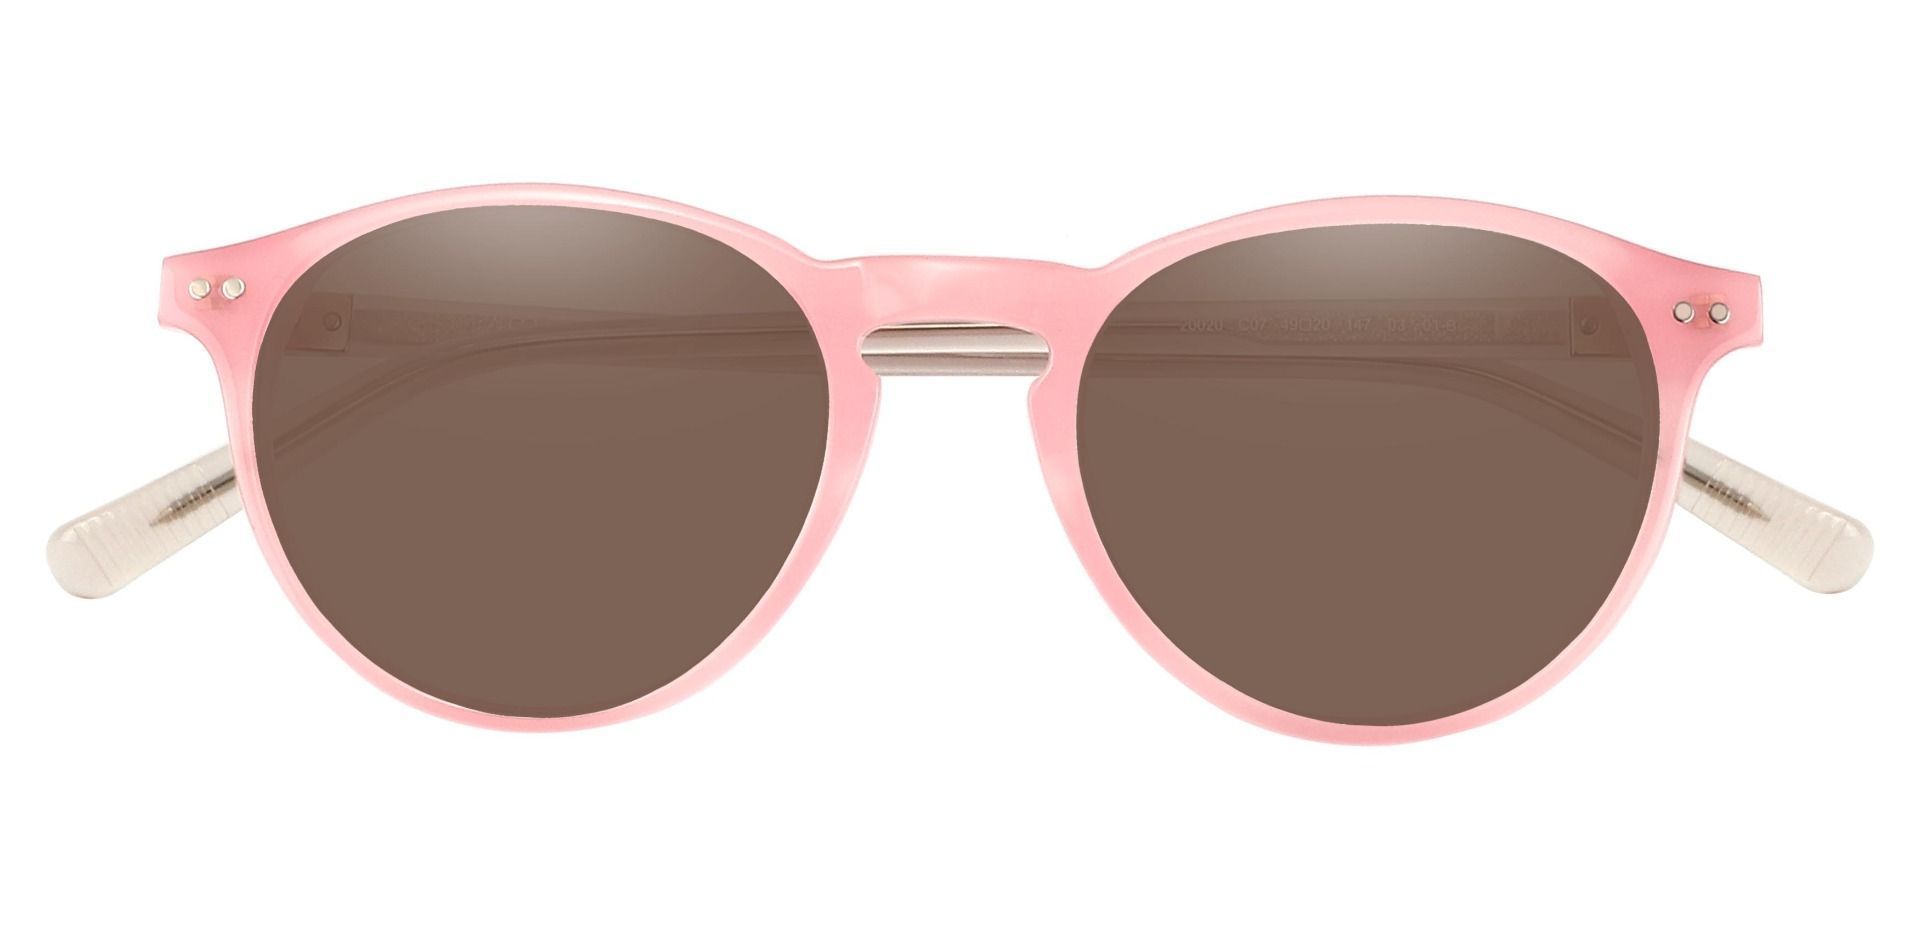 Monarch Oval Lined Bifocal Sunglasses - Pink Frame With Brown Lenses